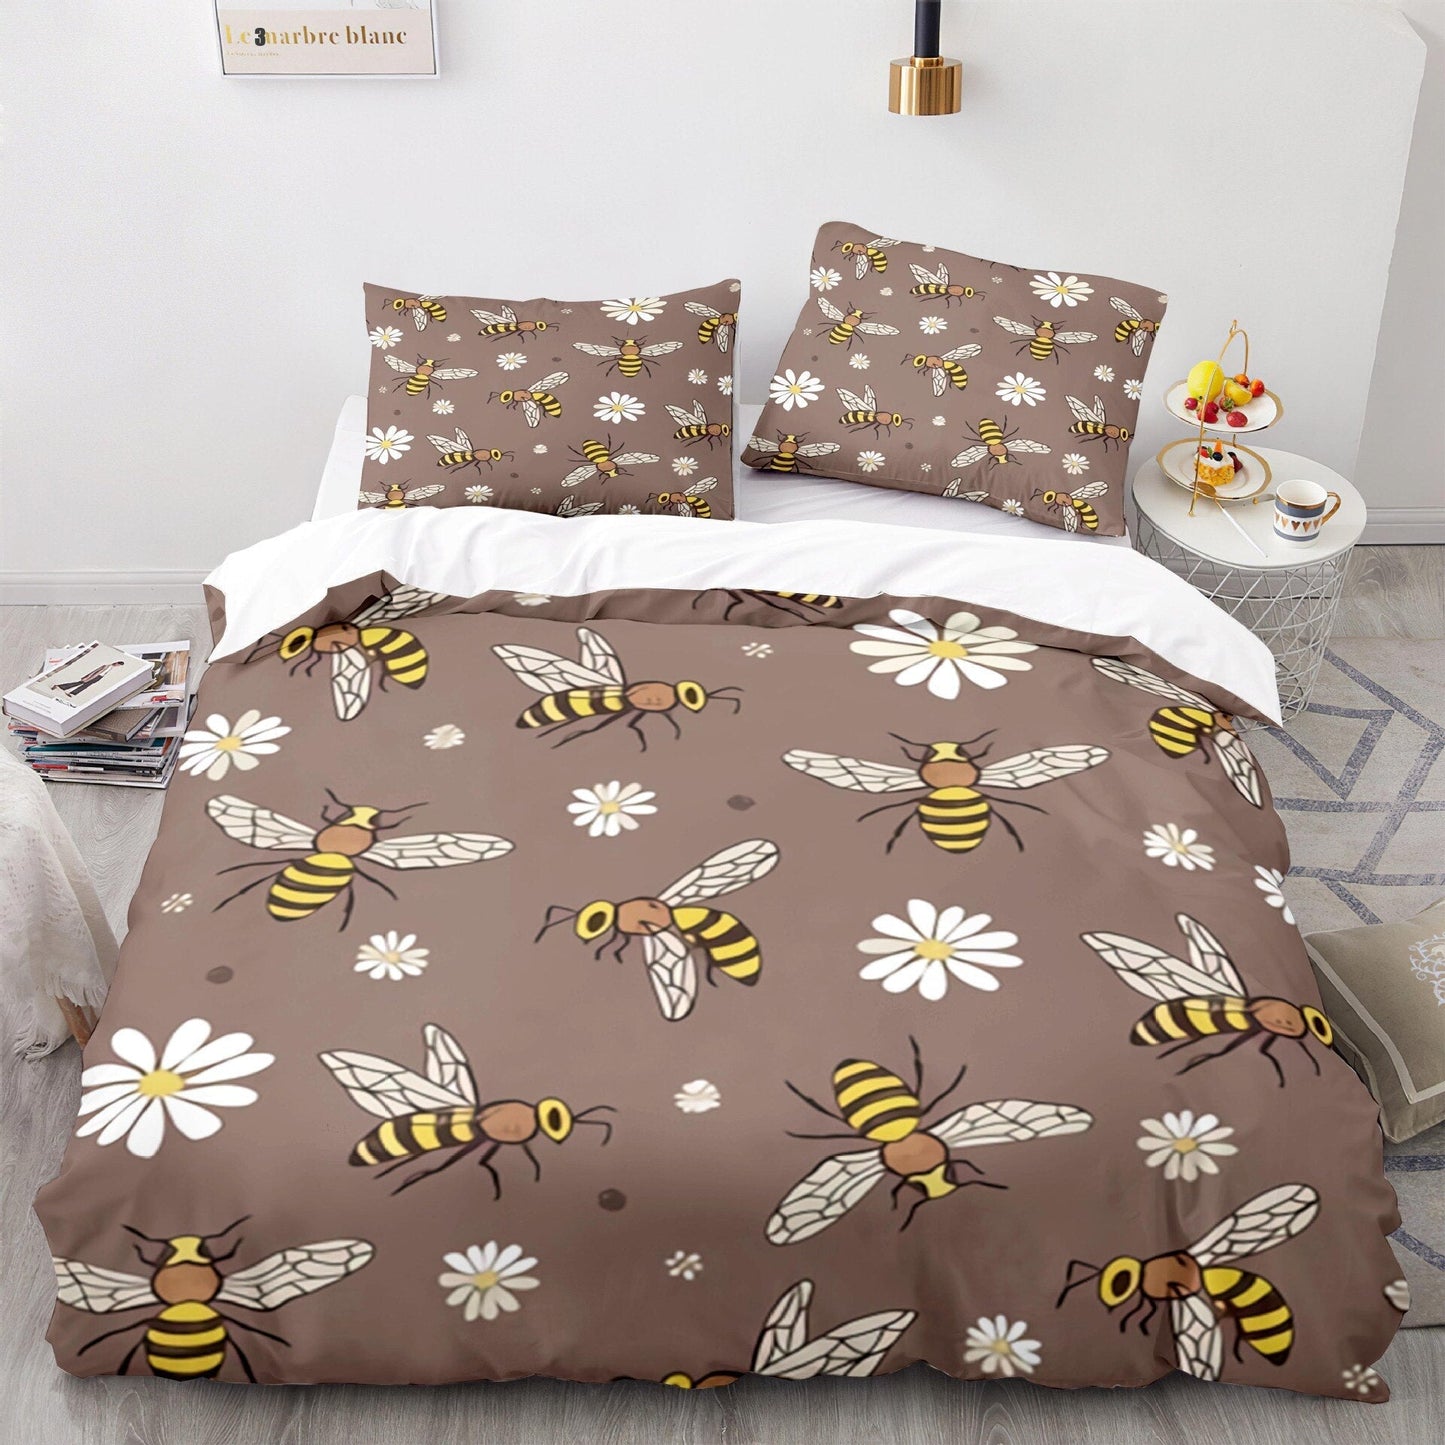 Wasp duvet cover